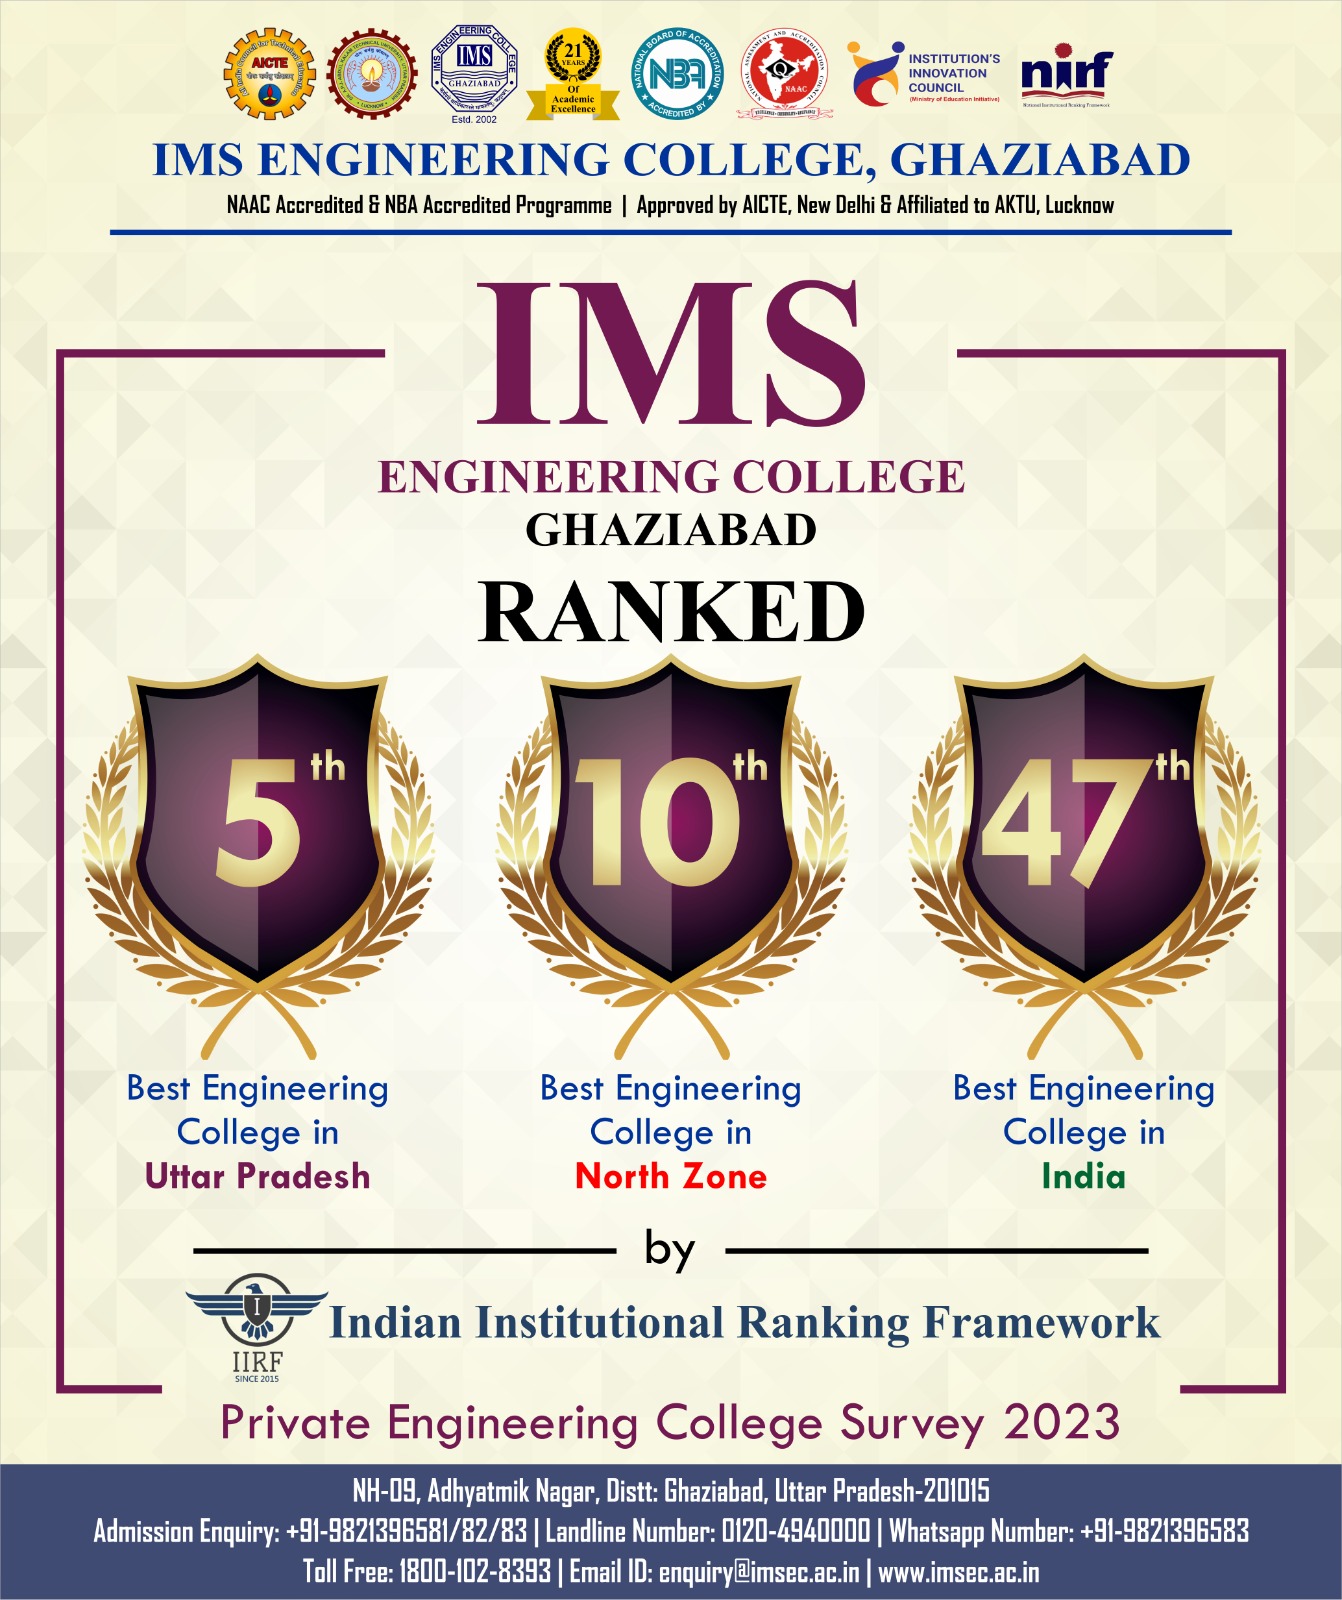 Ranked 5th in U.P., 10th in North Zone and 47 in India as Best Engineering College by Indian Institutional Ranking Framework(IIRF).